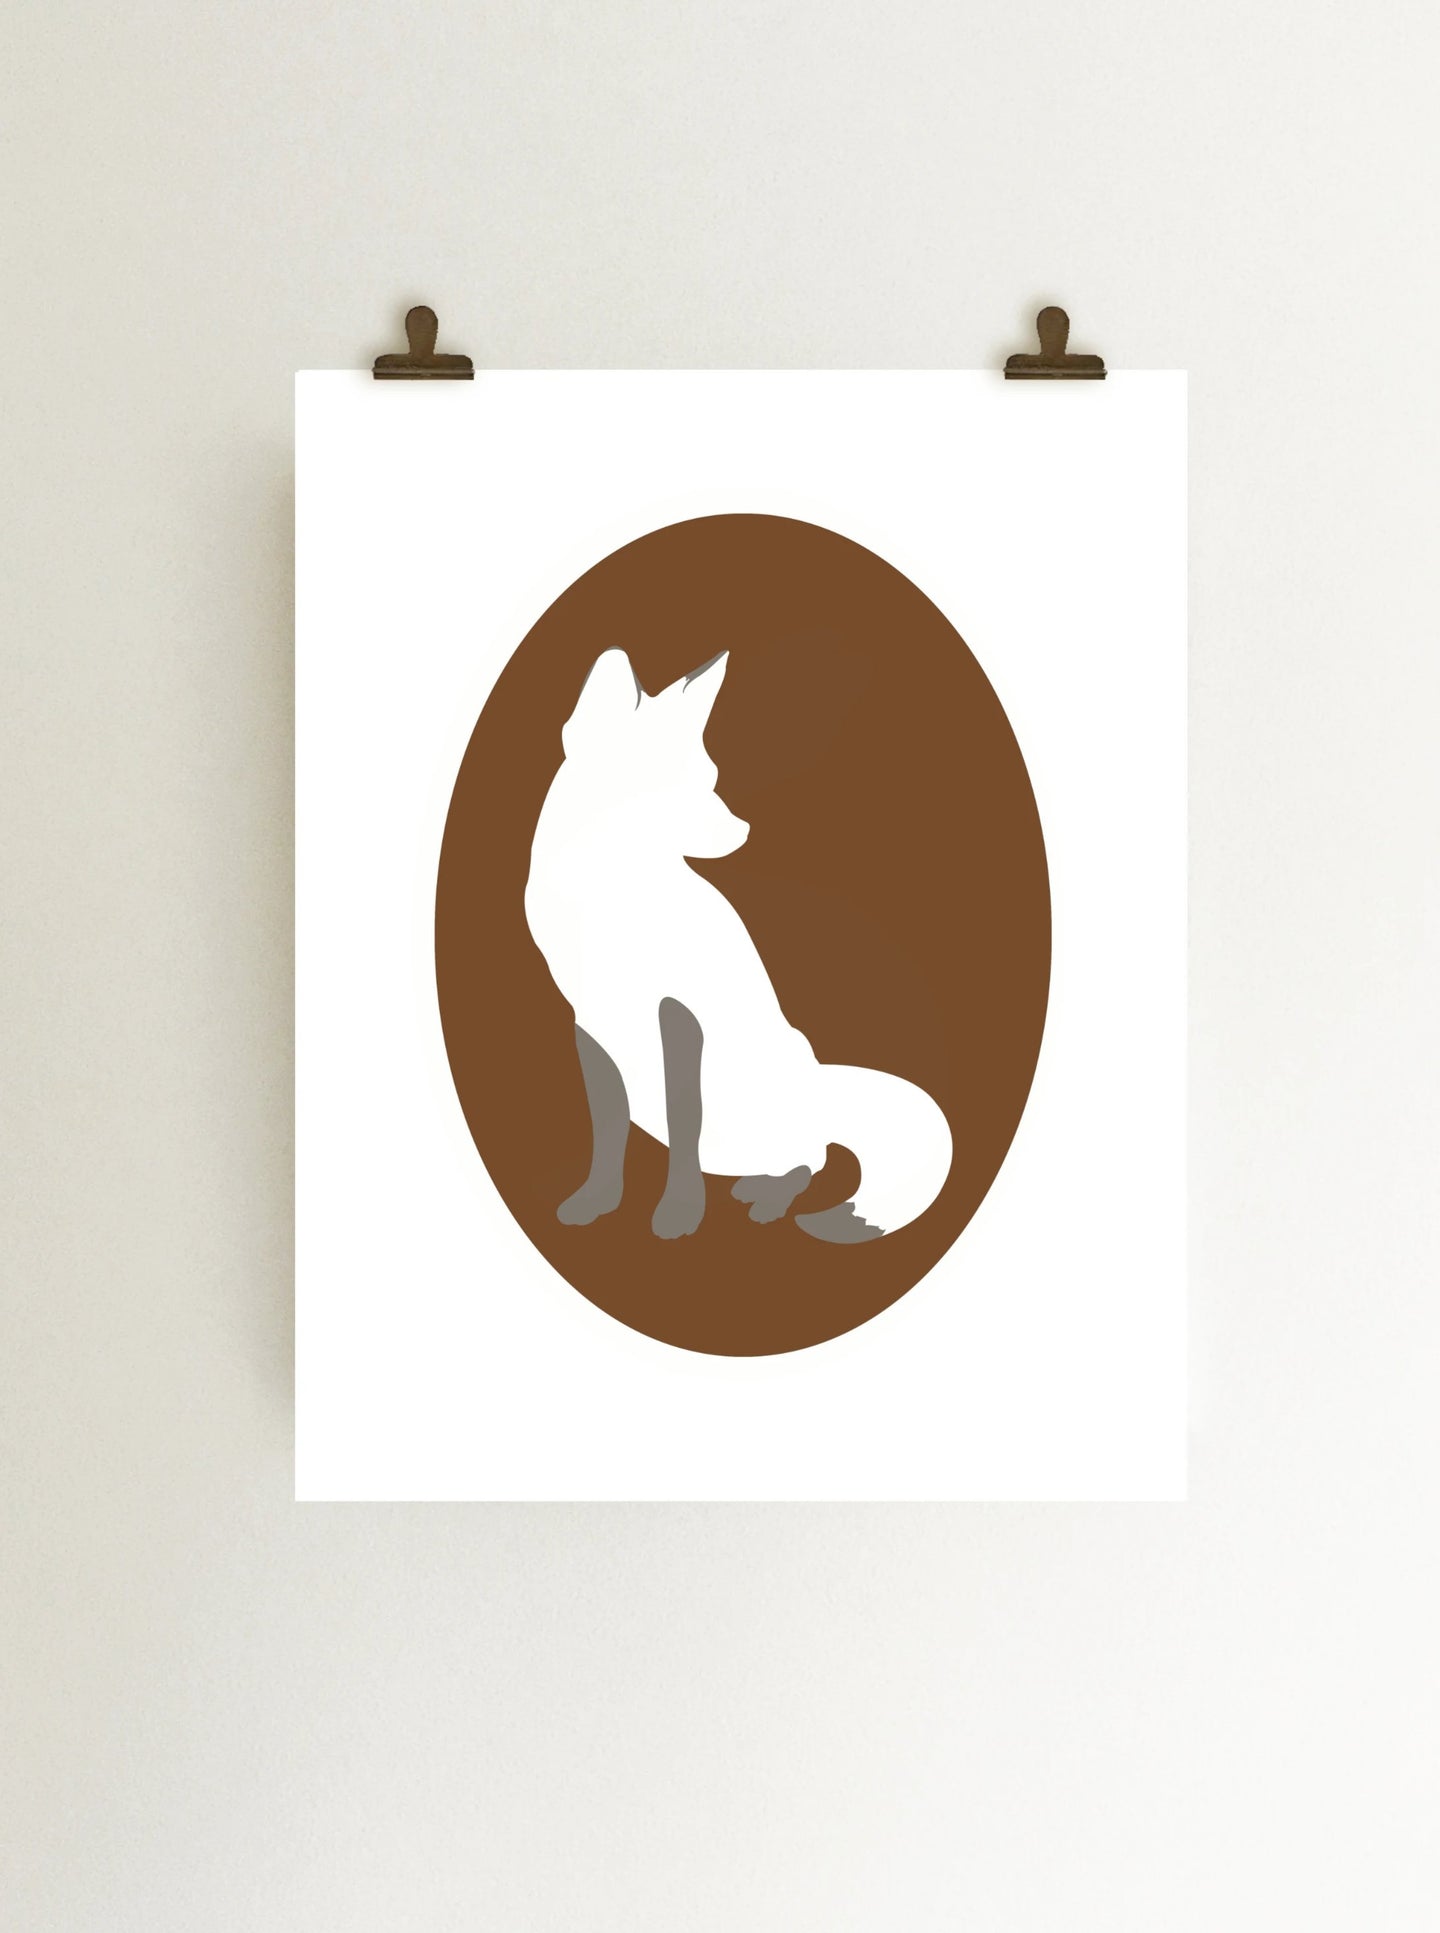 Fox cameo giclee art print on white paper shown hanging on wall from clips